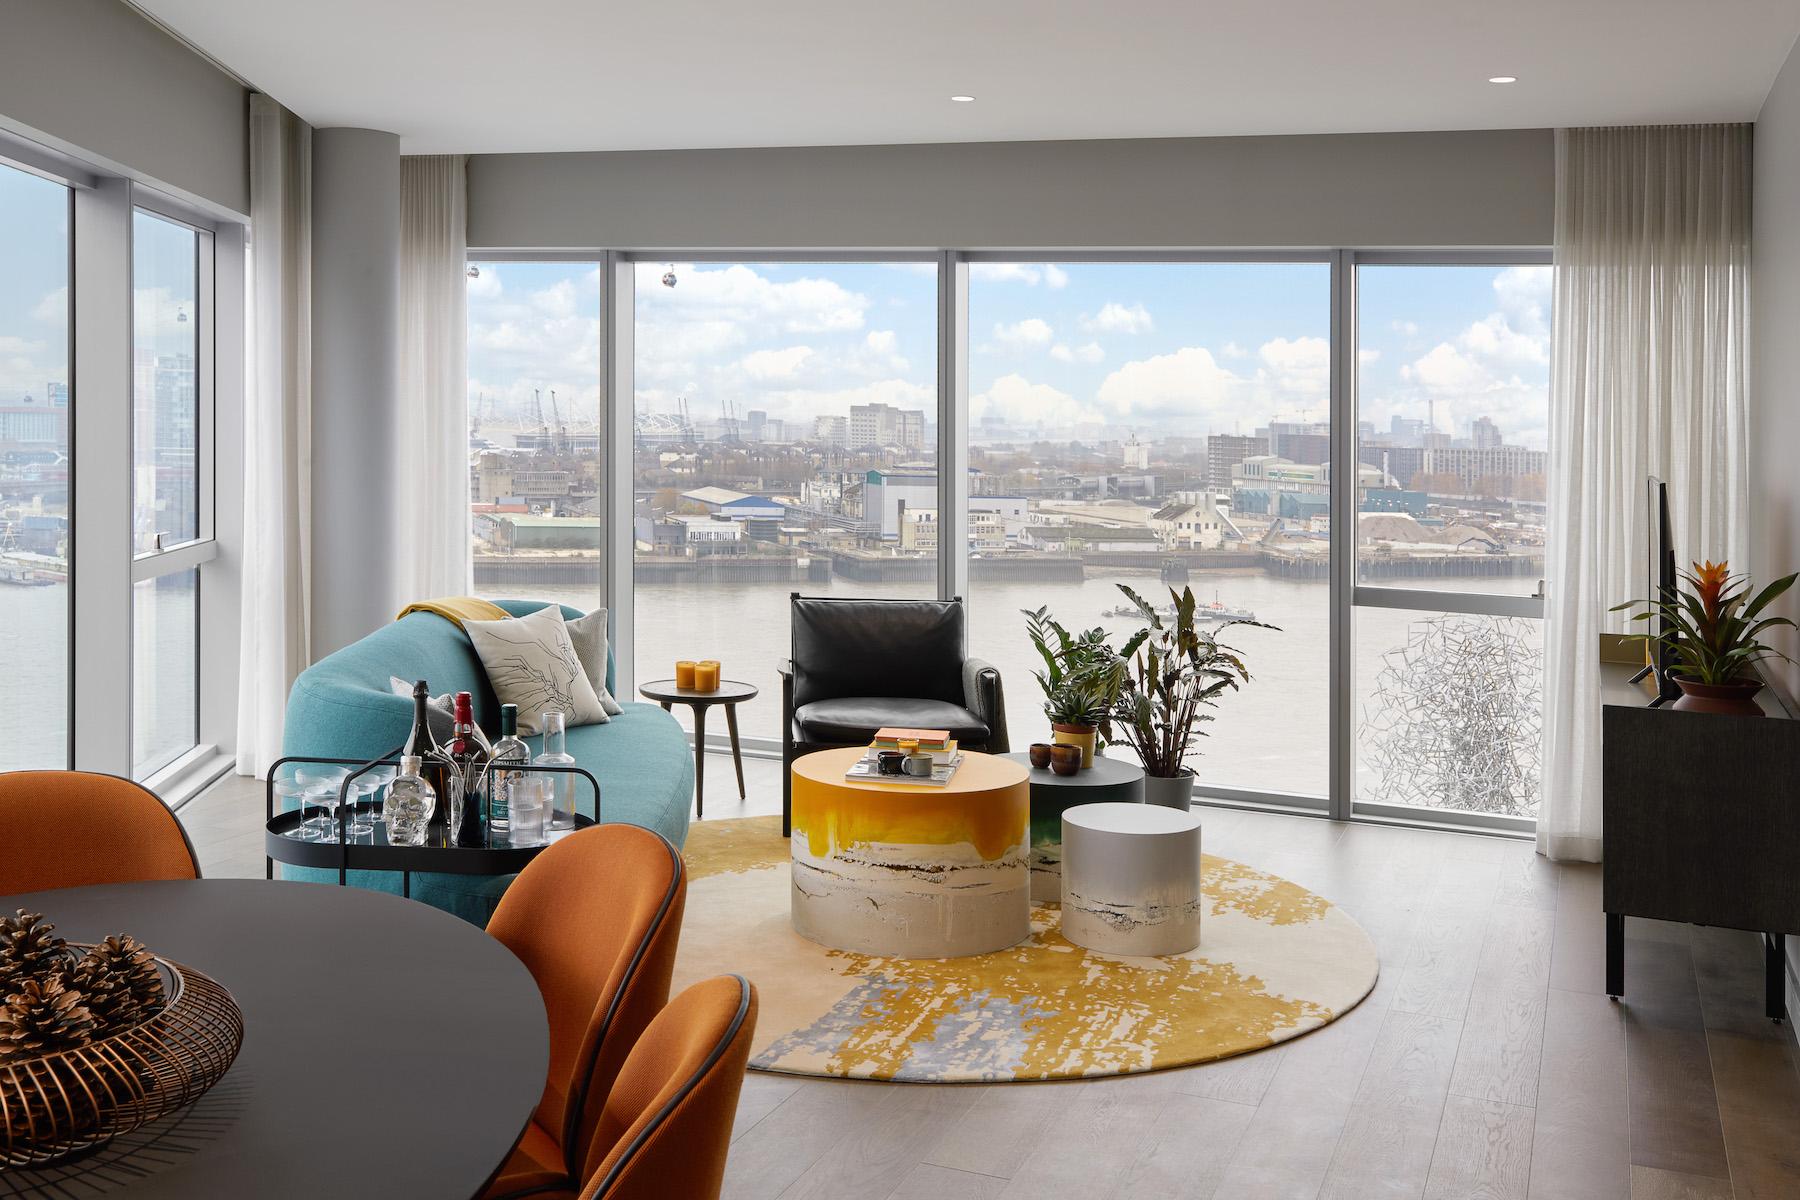 HJ Real Estate Guide: Greenwich Peninsula in the Heart of London